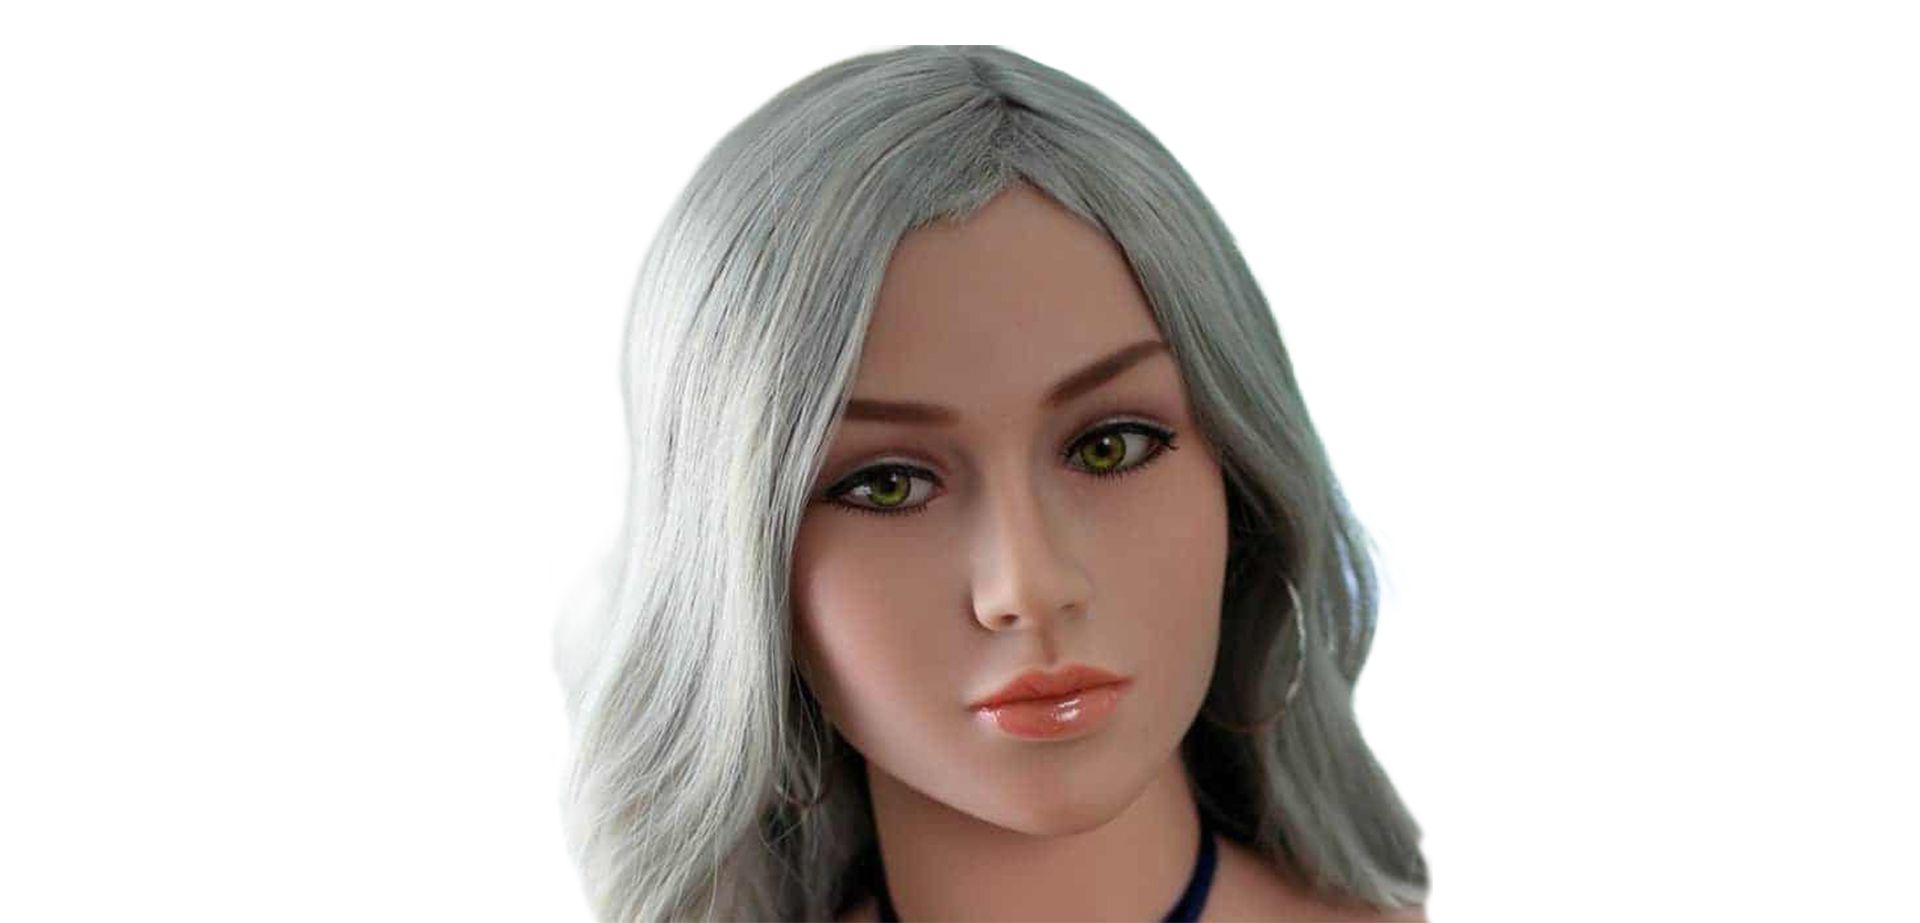 Blue-haired sex doll head.